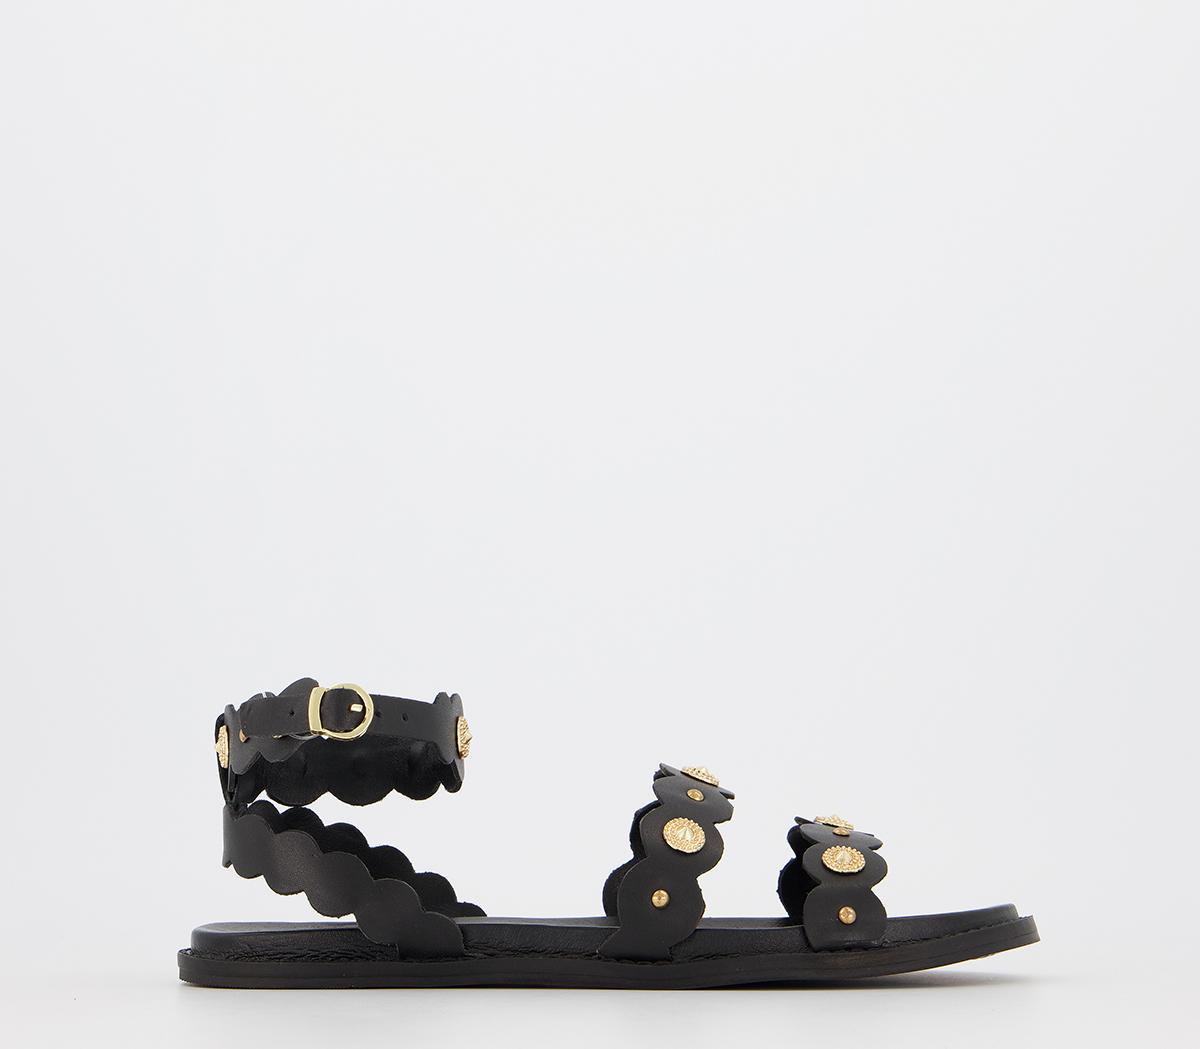 OFFICESiesta Strap SandalsBlack Leather With Gold Hardware